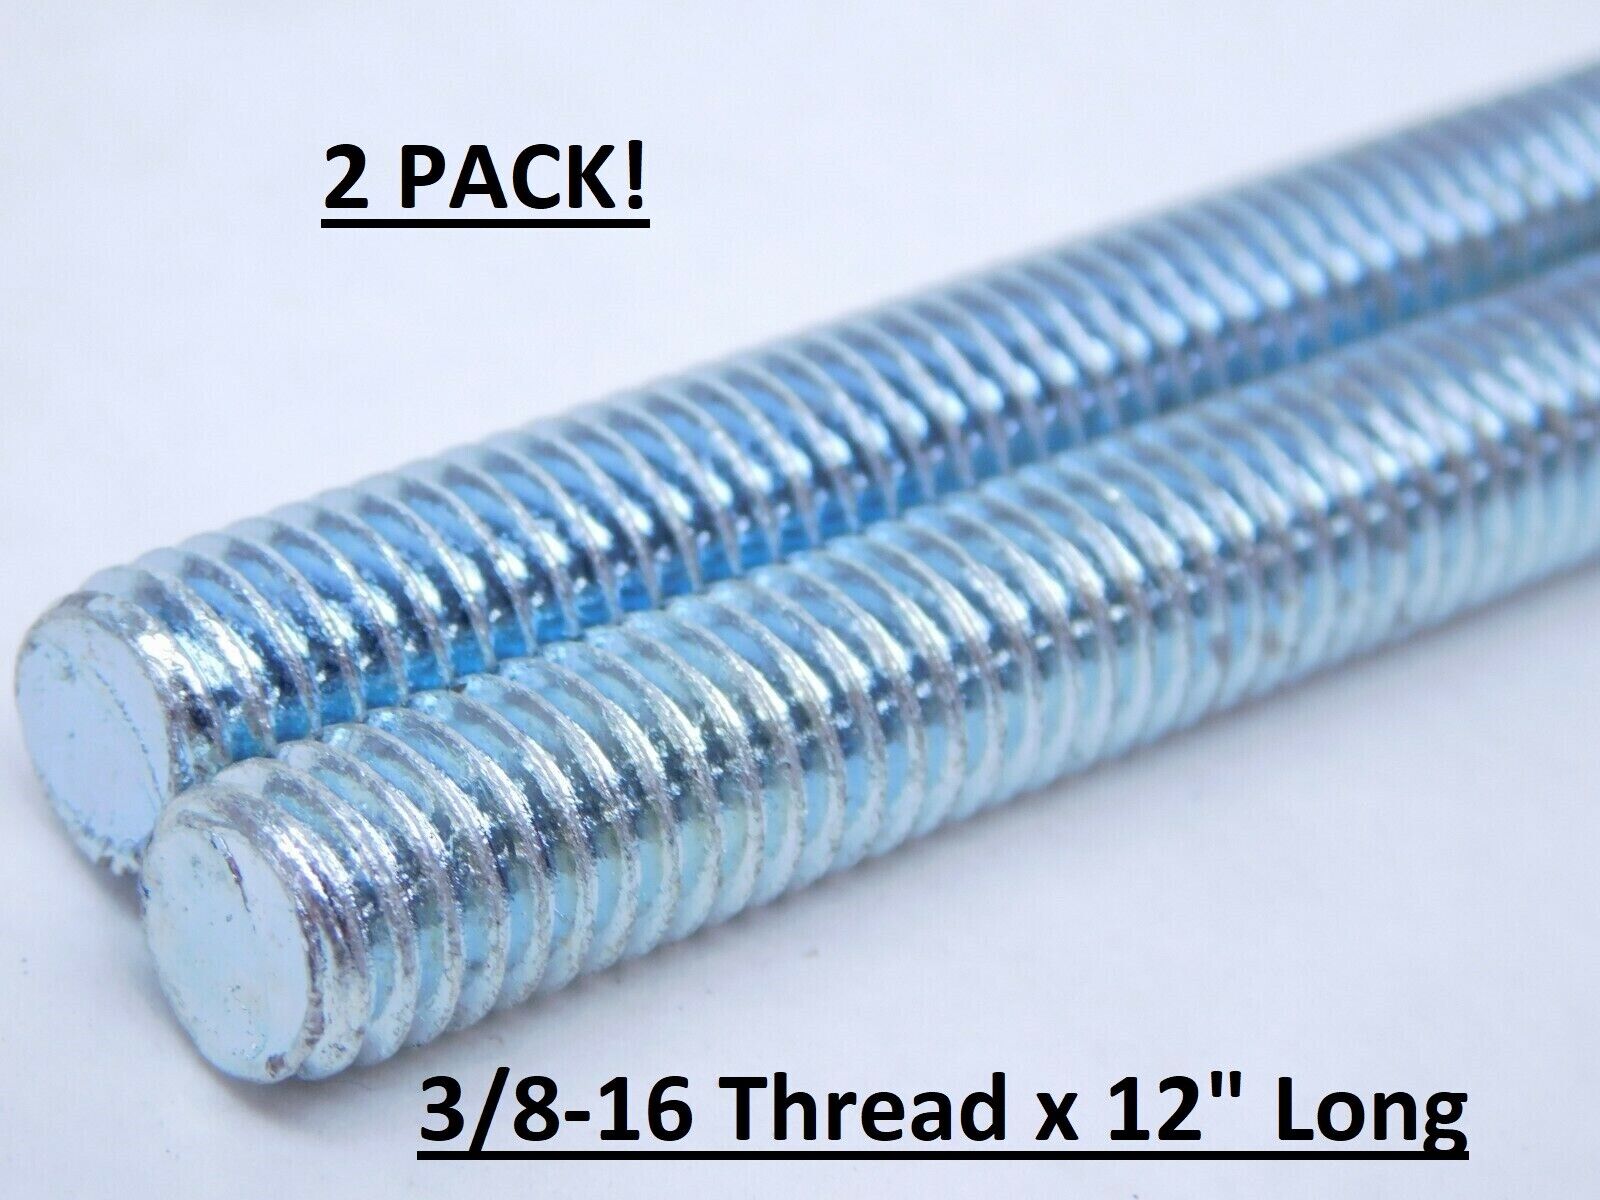 2 Pack - All Threaded Rod Zinc-plated Steel Size: 3/8-16" Thread X 12" Long